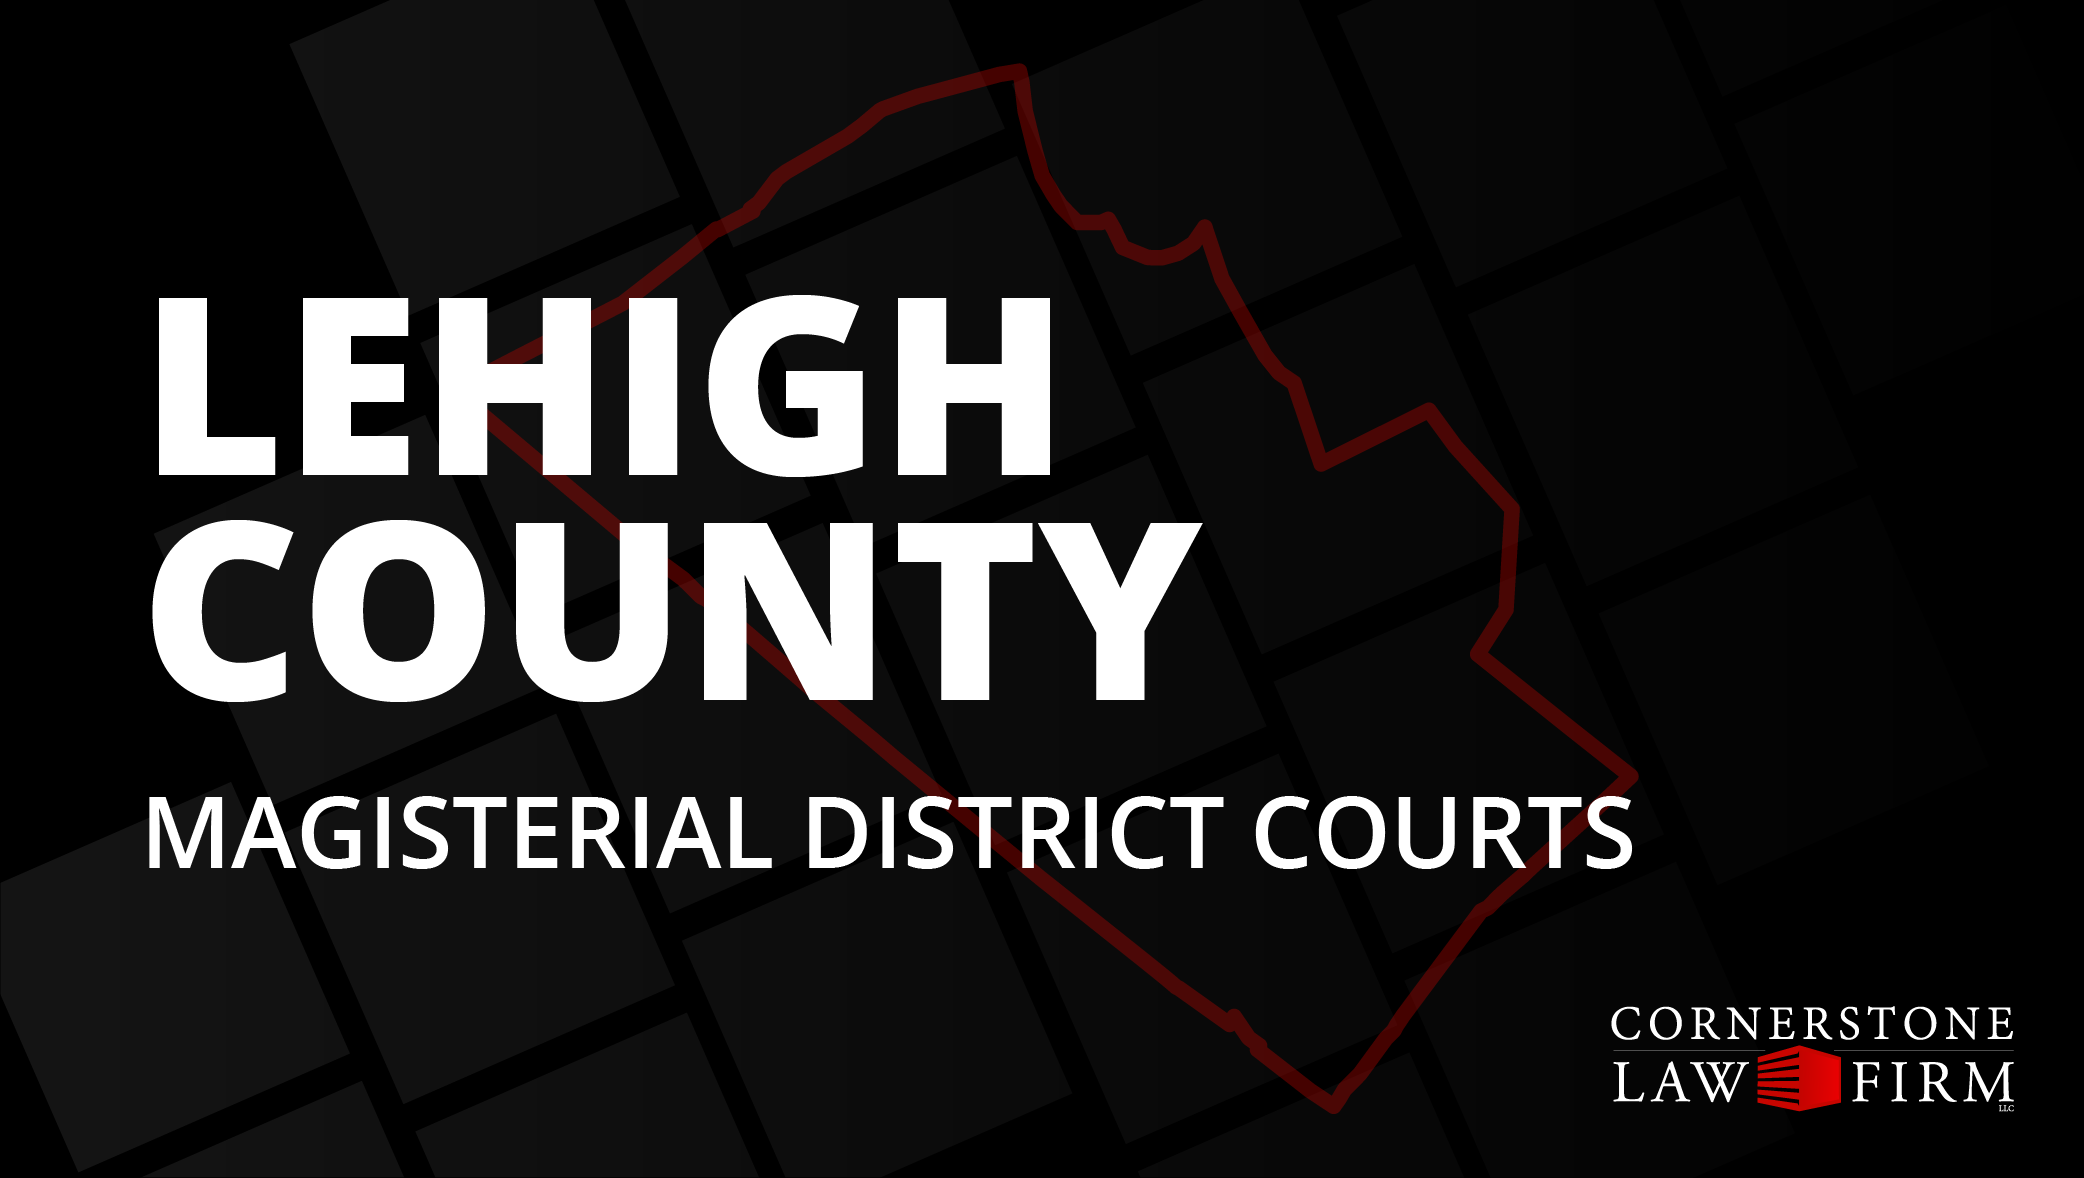 The words "Lehigh County Magisterial District Courts" over a black background with a faded red outline of the county.